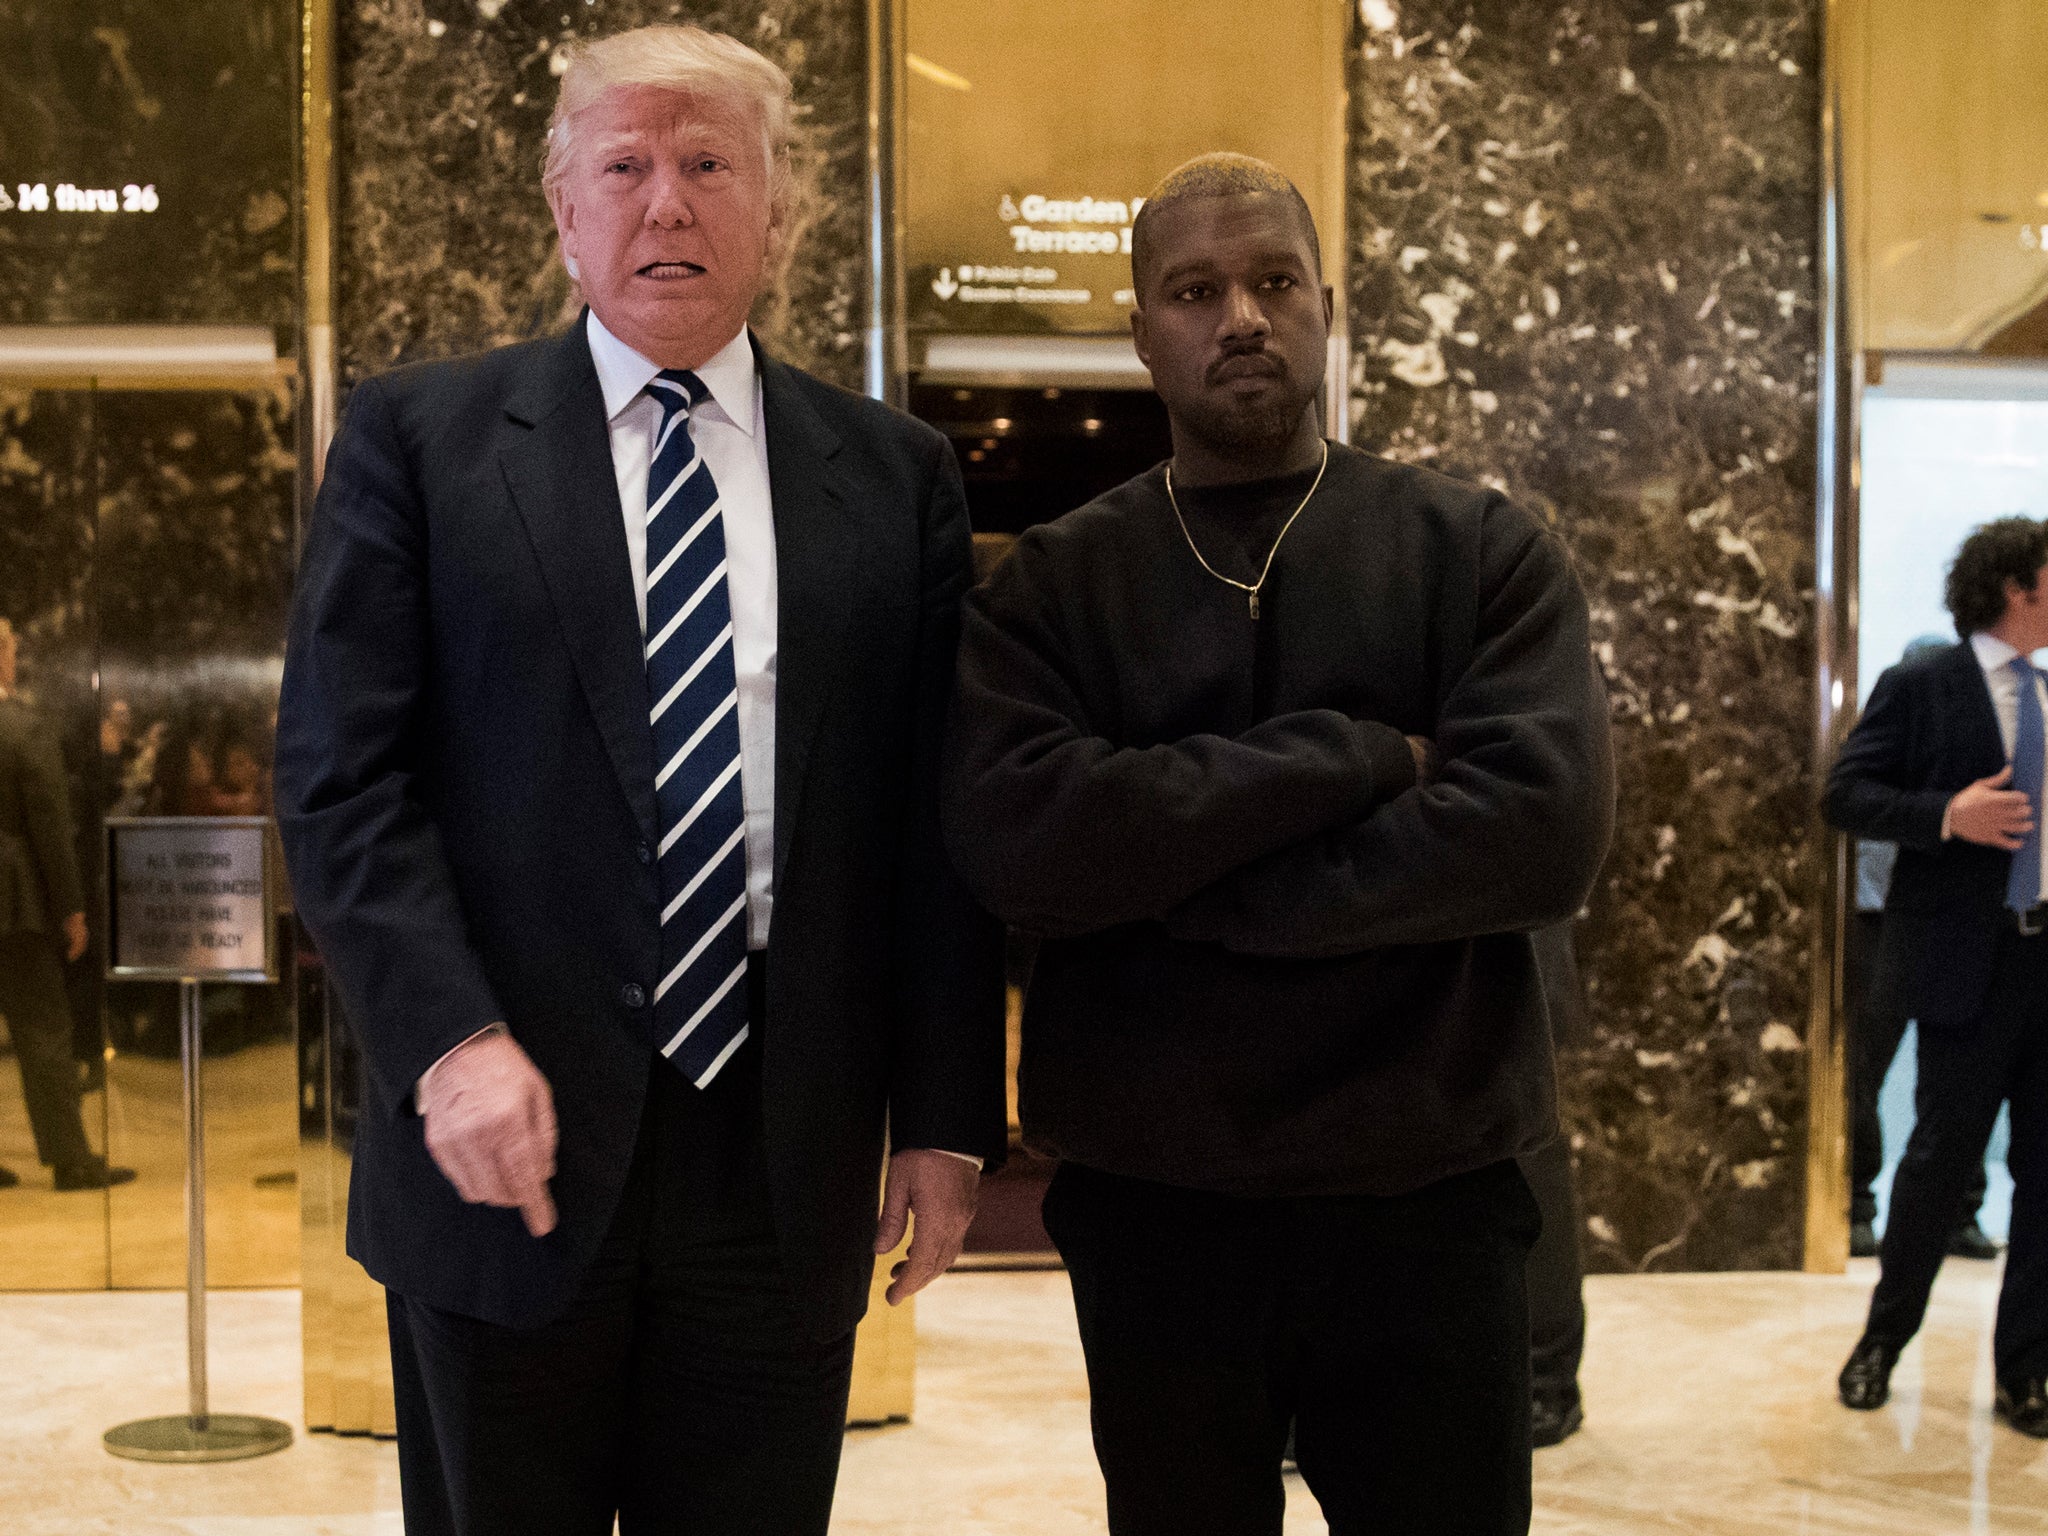 Trump and West stand in the lobby of Trump Tower in Manhattan